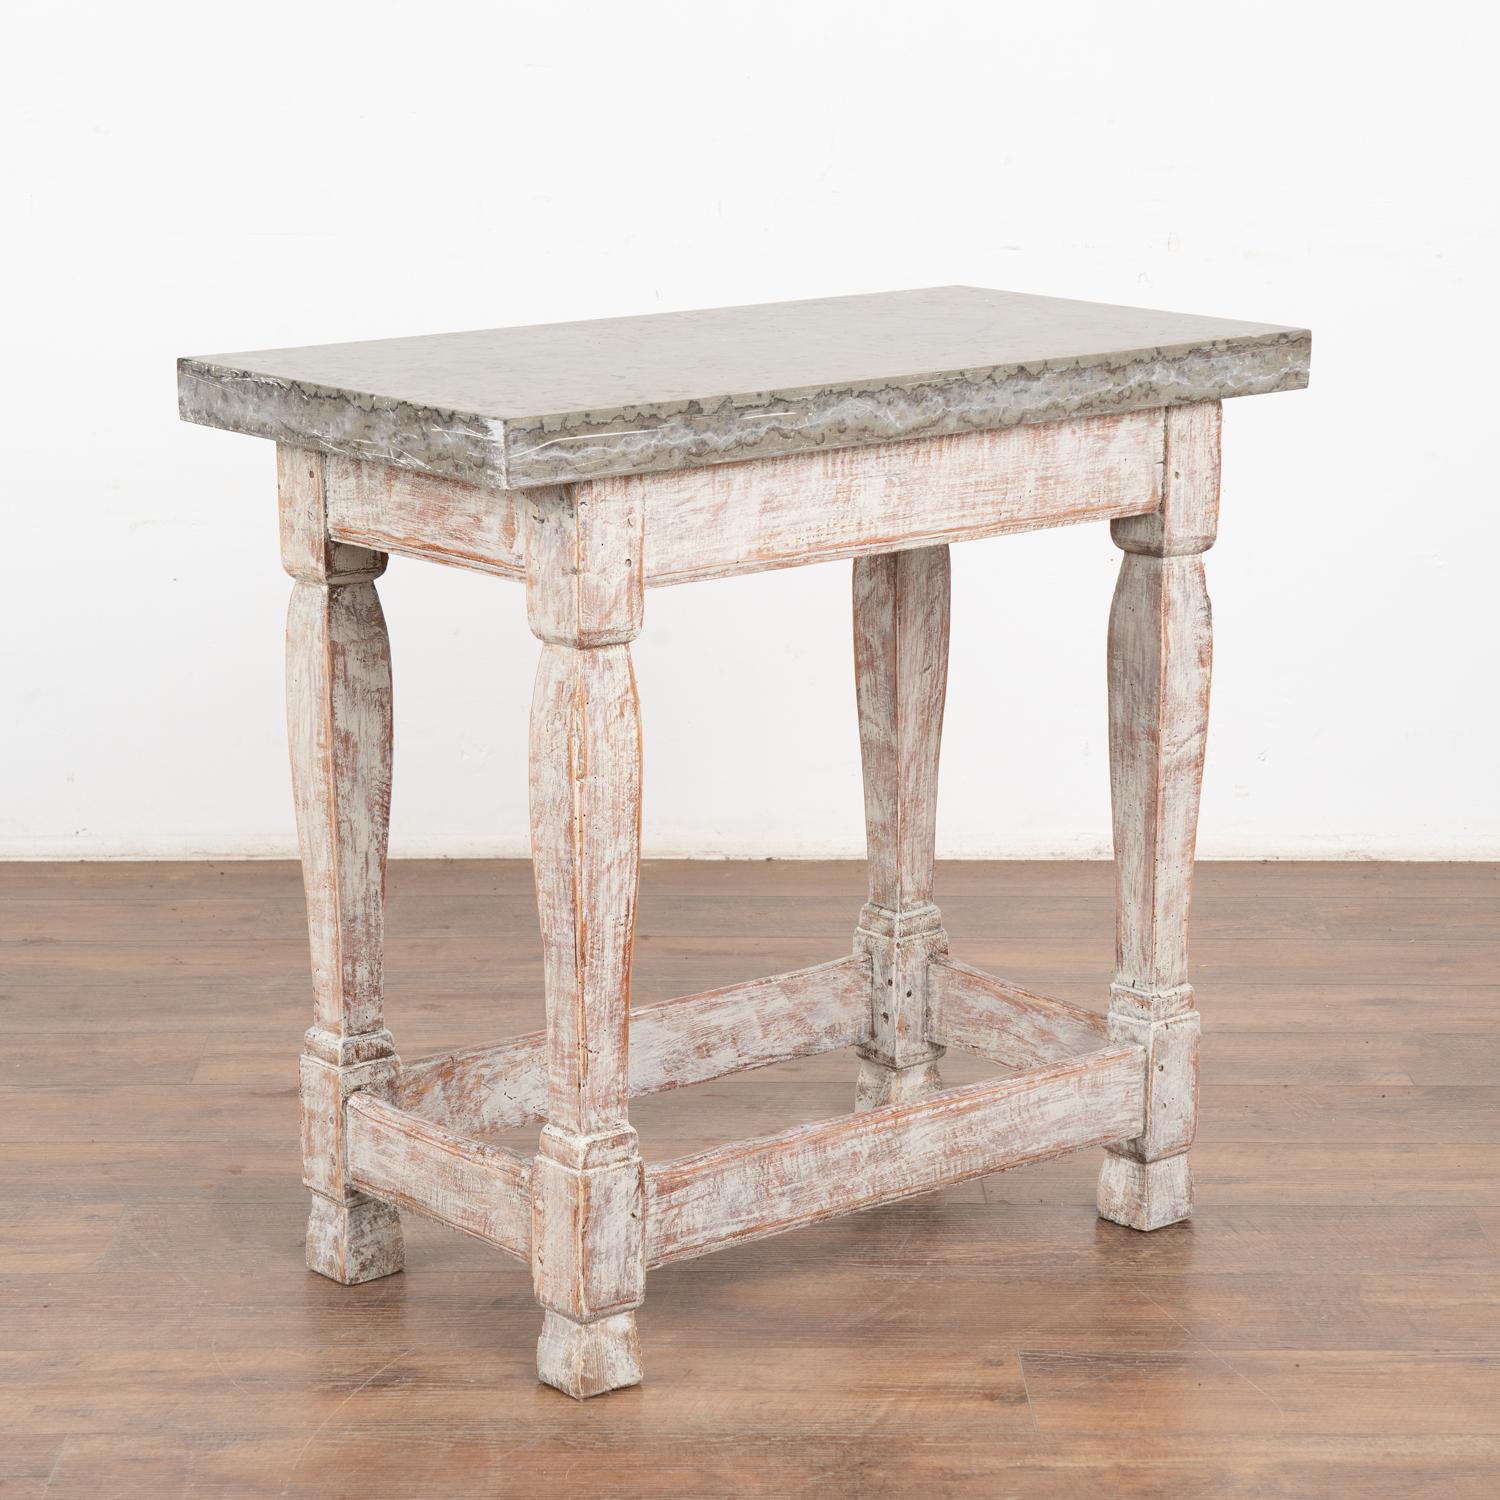 Stone Top Side Table Small Console Table, Sweden circa 1800-40 For Sale 5